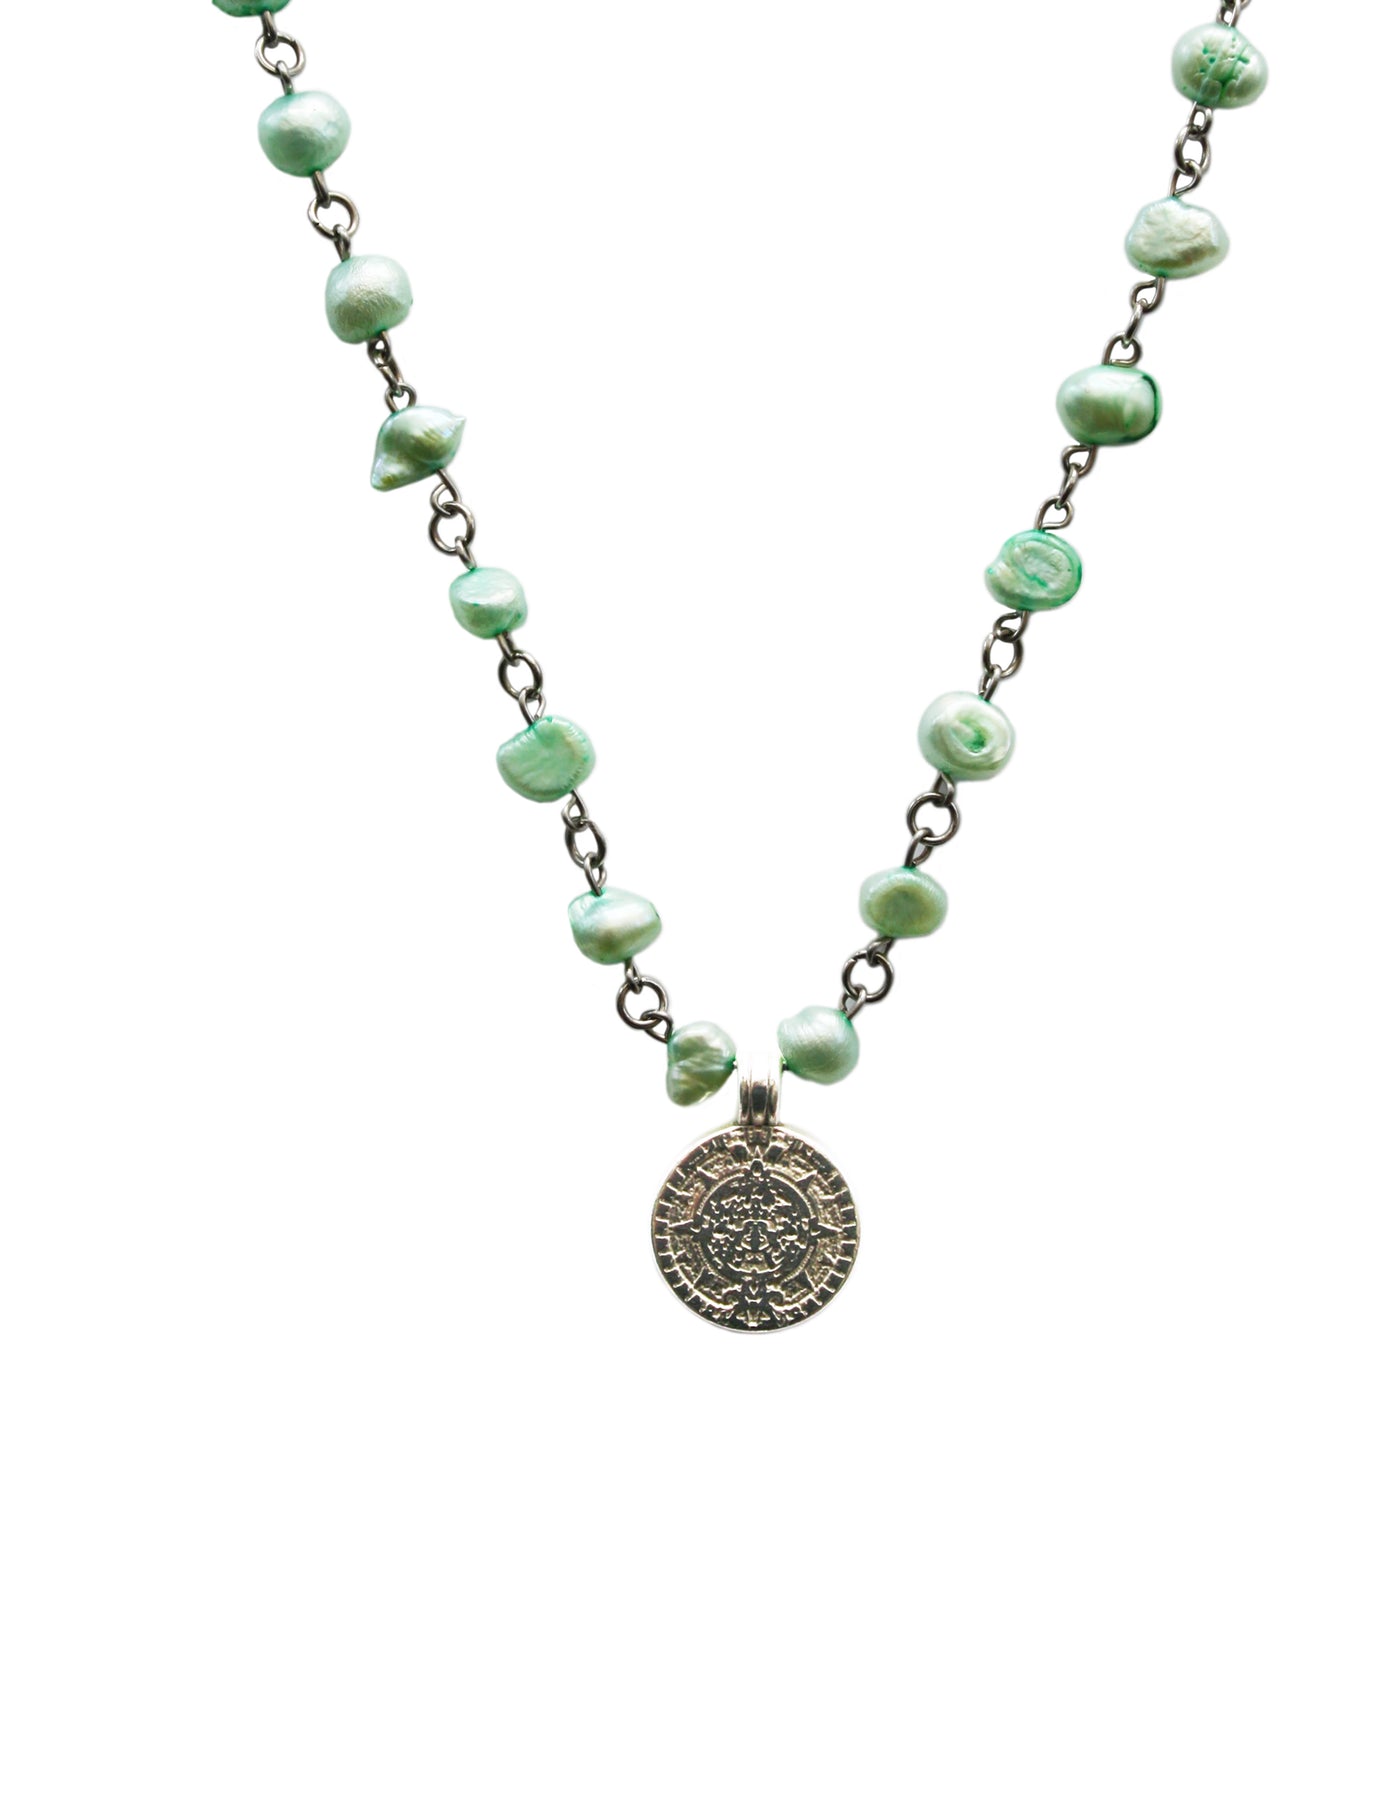 50% OFF Green Pearl Coin Necklace!